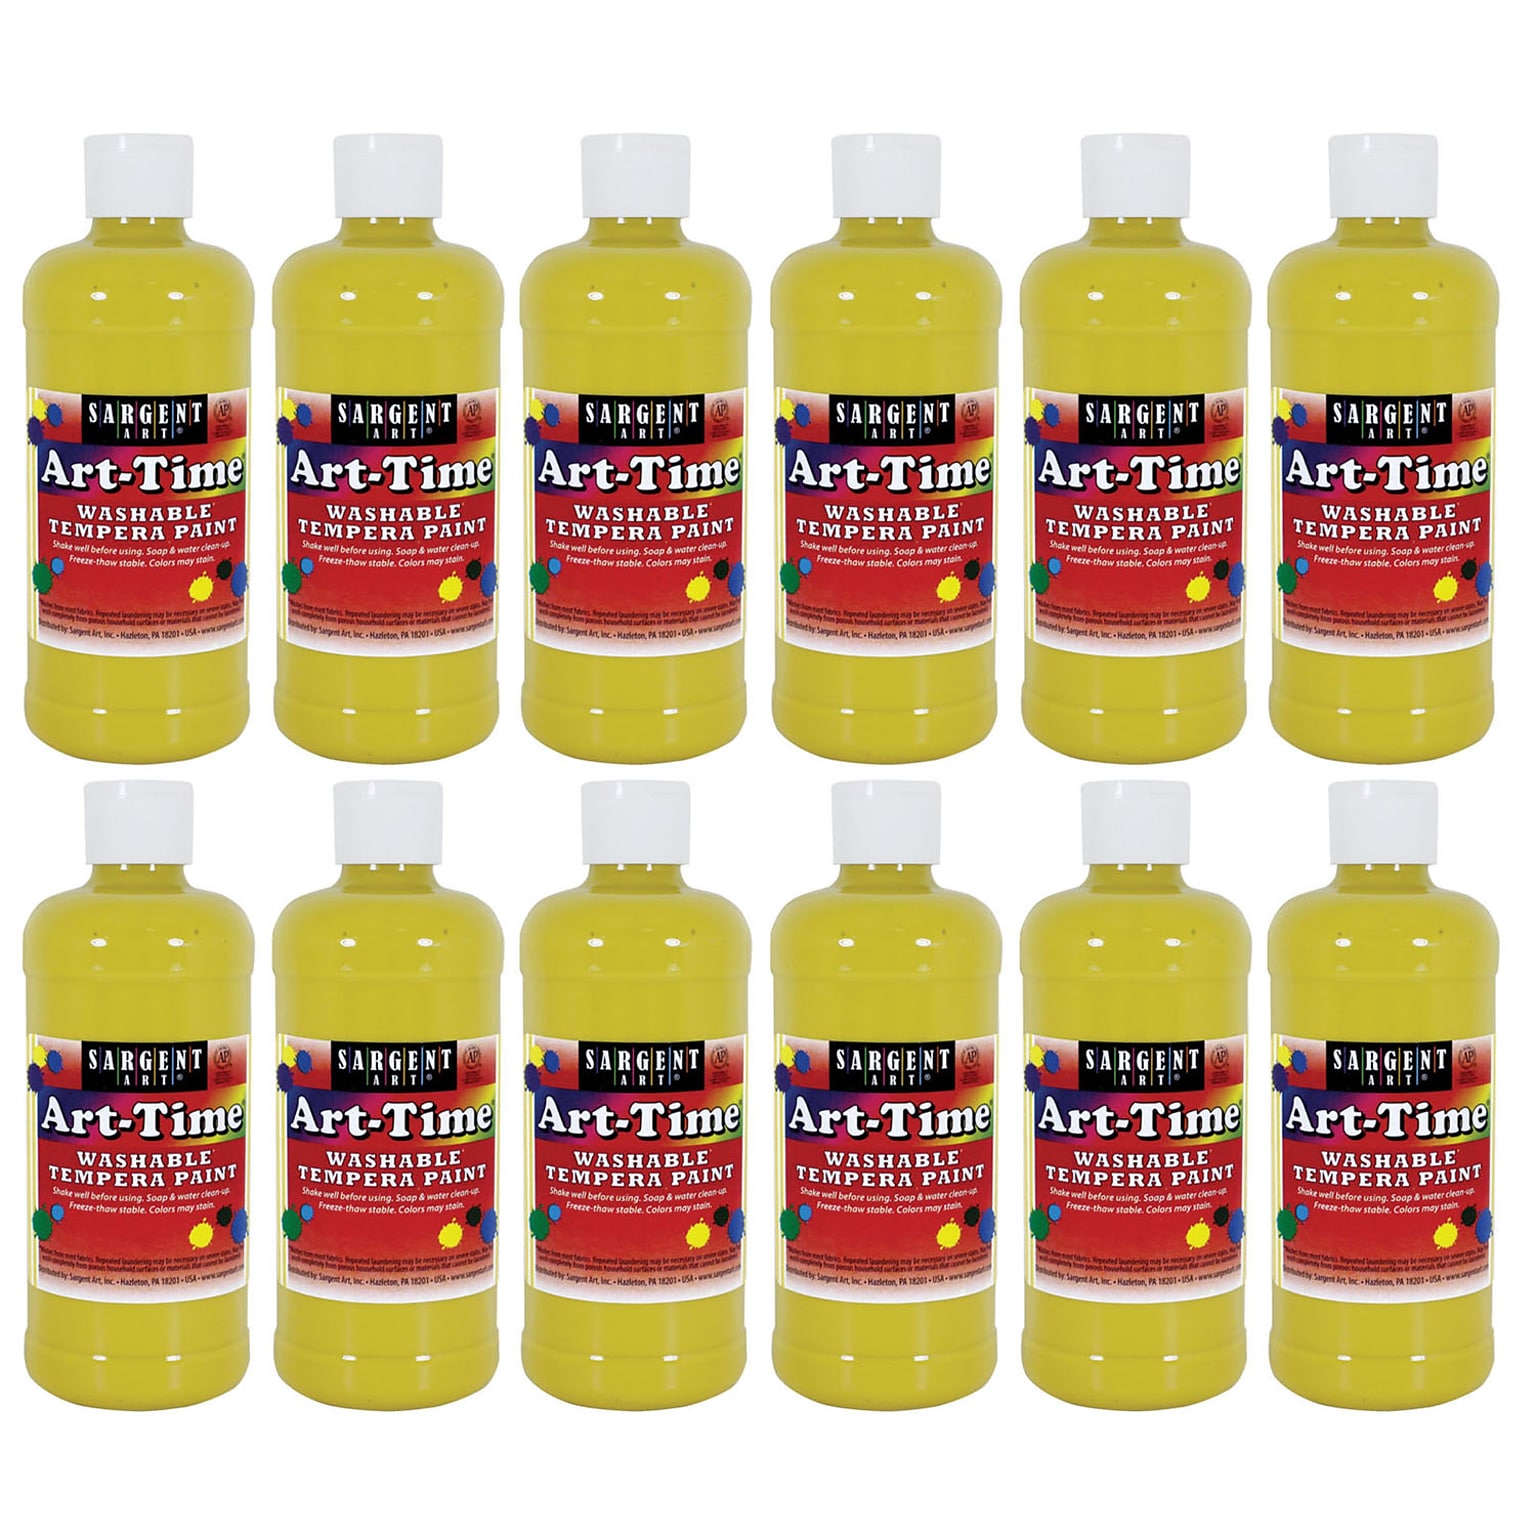 Sargent Art Art-Time Washable Tempera Paint, Yellow, 16 oz., Pack of 12 (SAR173402-12)